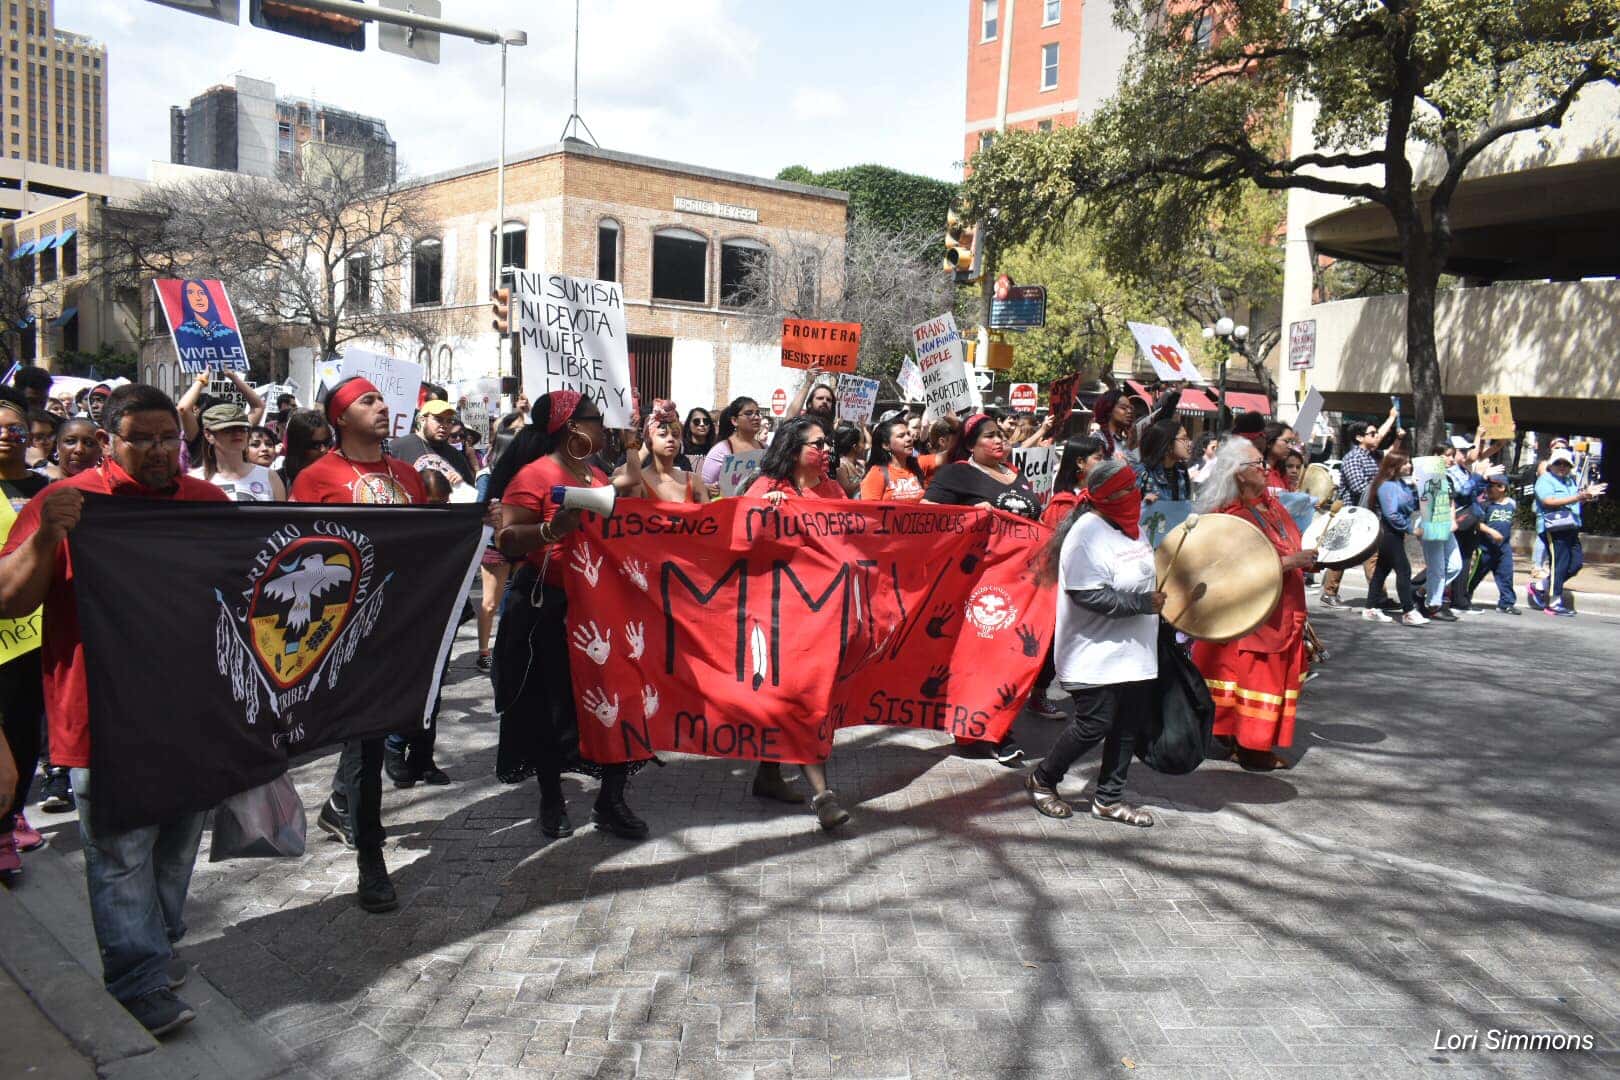 A group of Carrizo Comecrudo Tribe Members marches down the street while holding a hand-made sign.